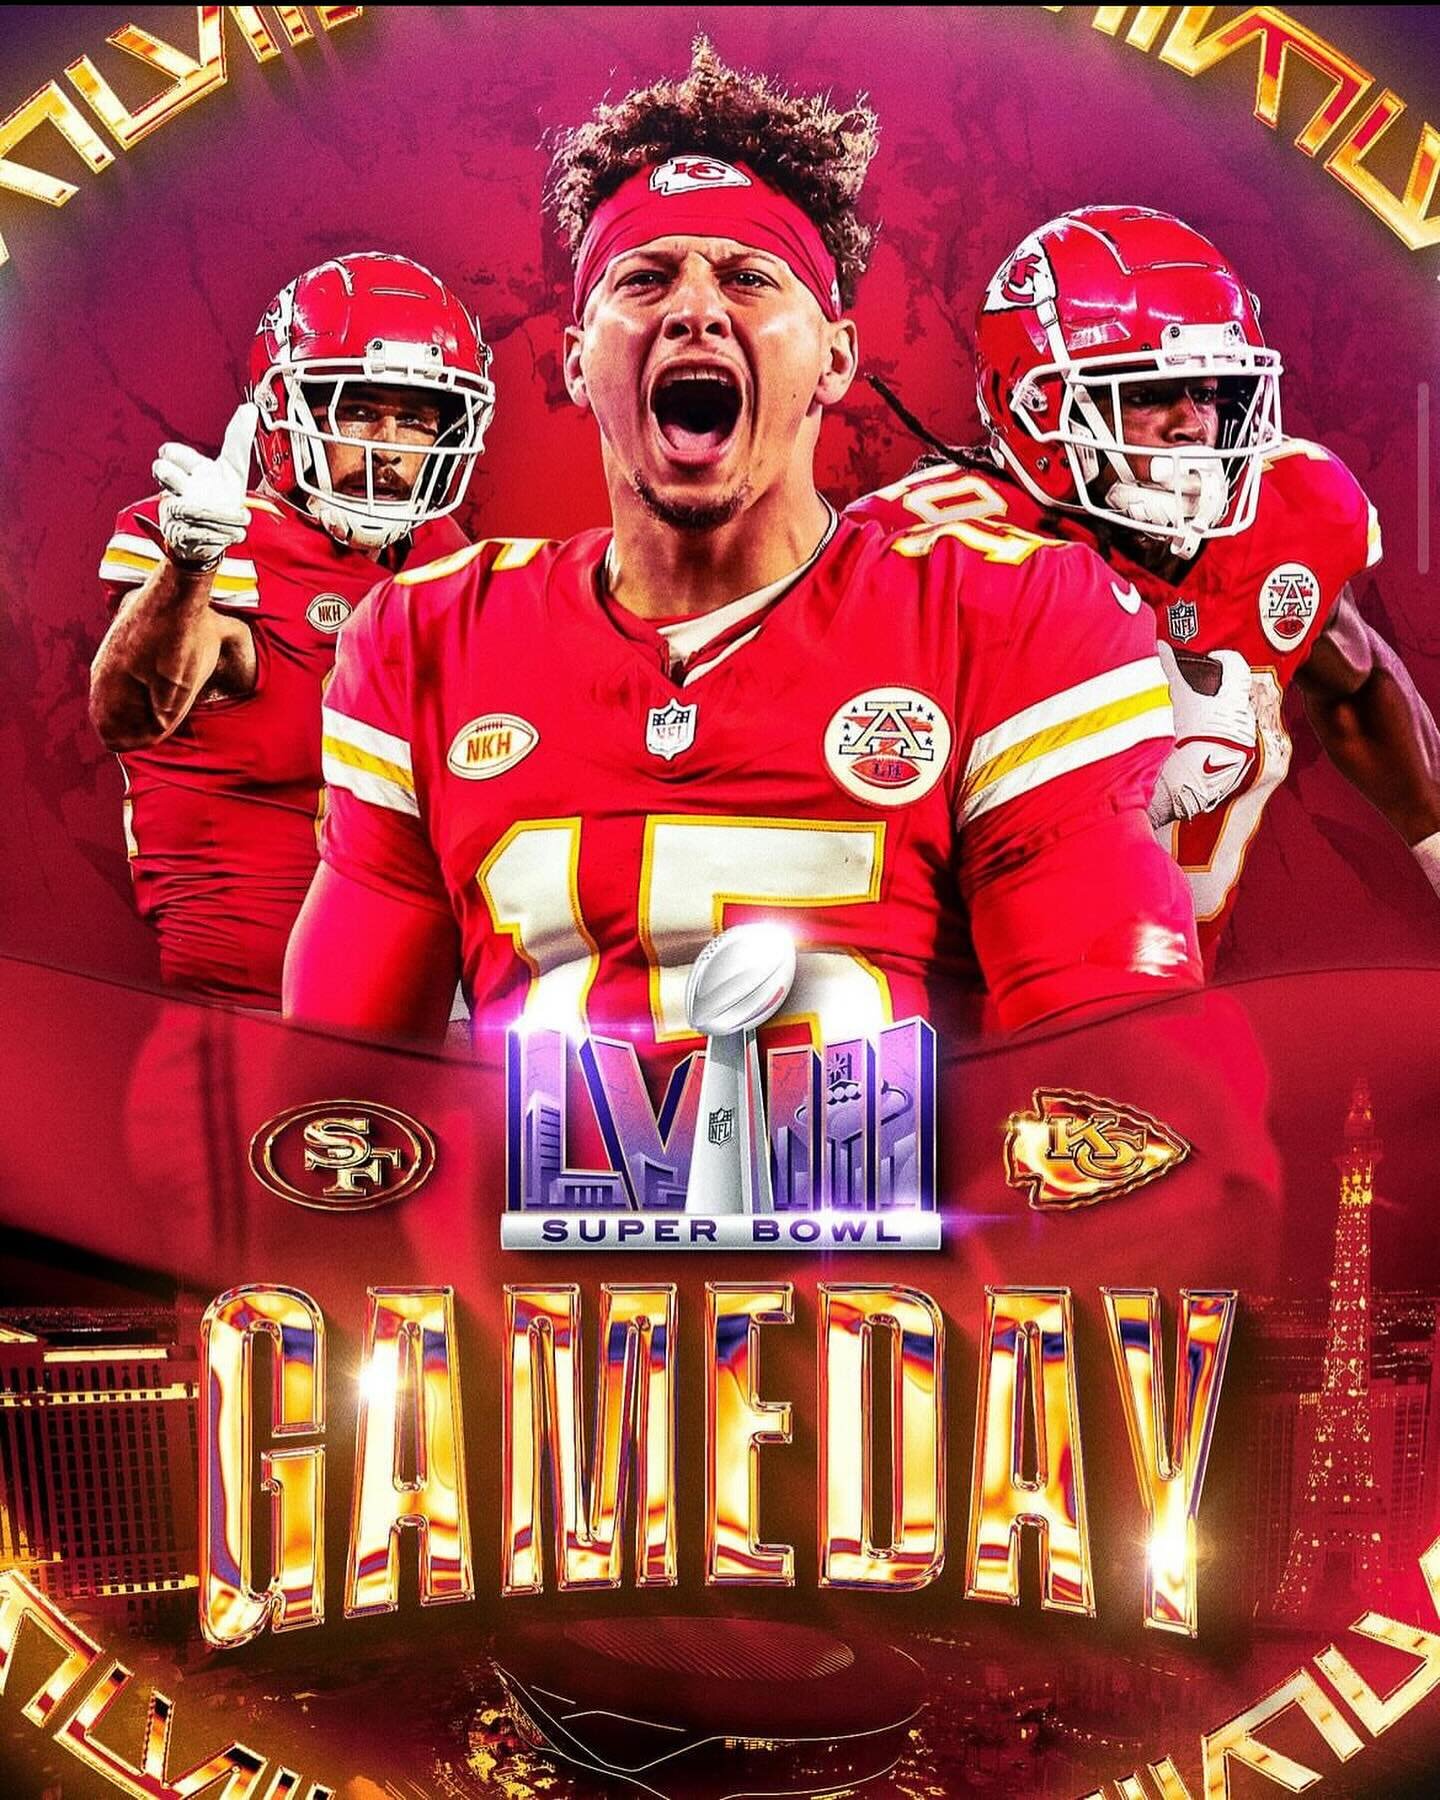 Super Bowl Sunday!
Come enjoy happy hours specials with us until the start of the game. 
We will be closing early at 5:30!

 GO CHIEFS!
#gochiefs #chiefs #superbowl